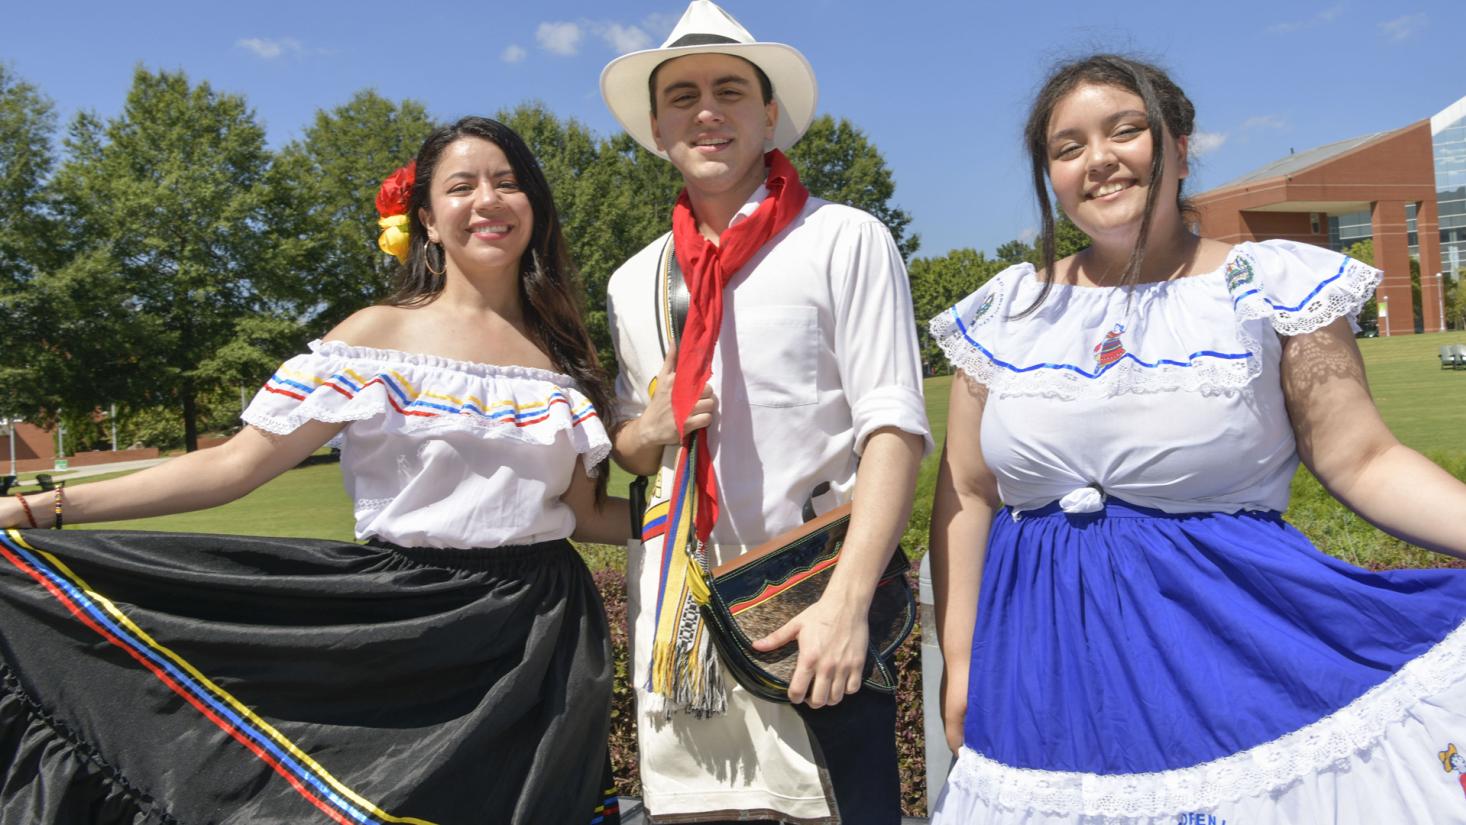 A man and two women wearing cultural clothing